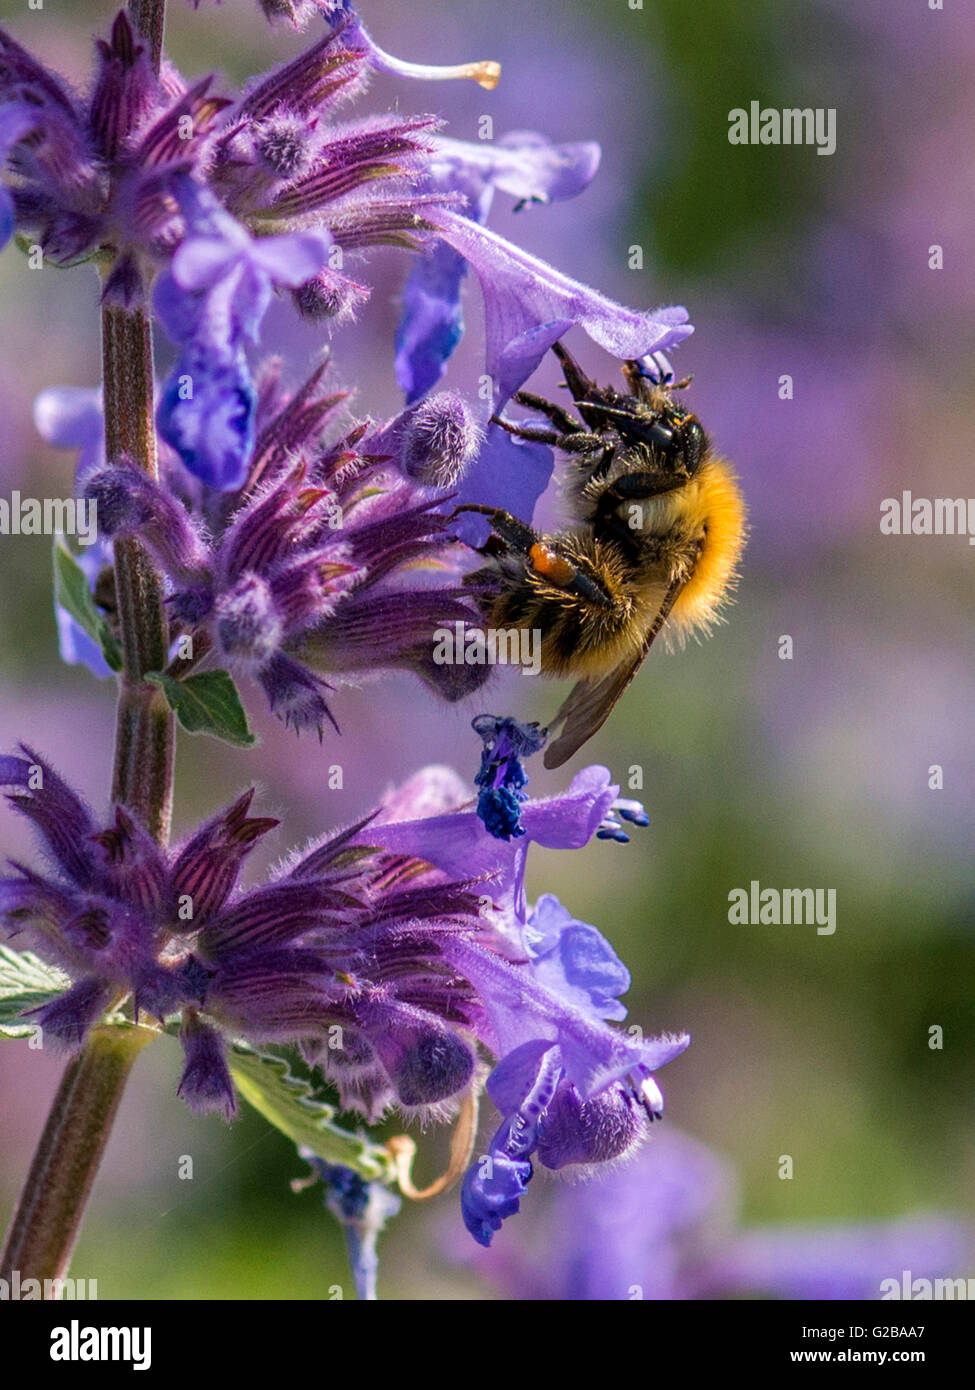 Spring Pollinator, Bumblebee (Bombus) collecting nectar from the vivid blue bell shaped flowers of the Salvia or sage plant. Stock Photo